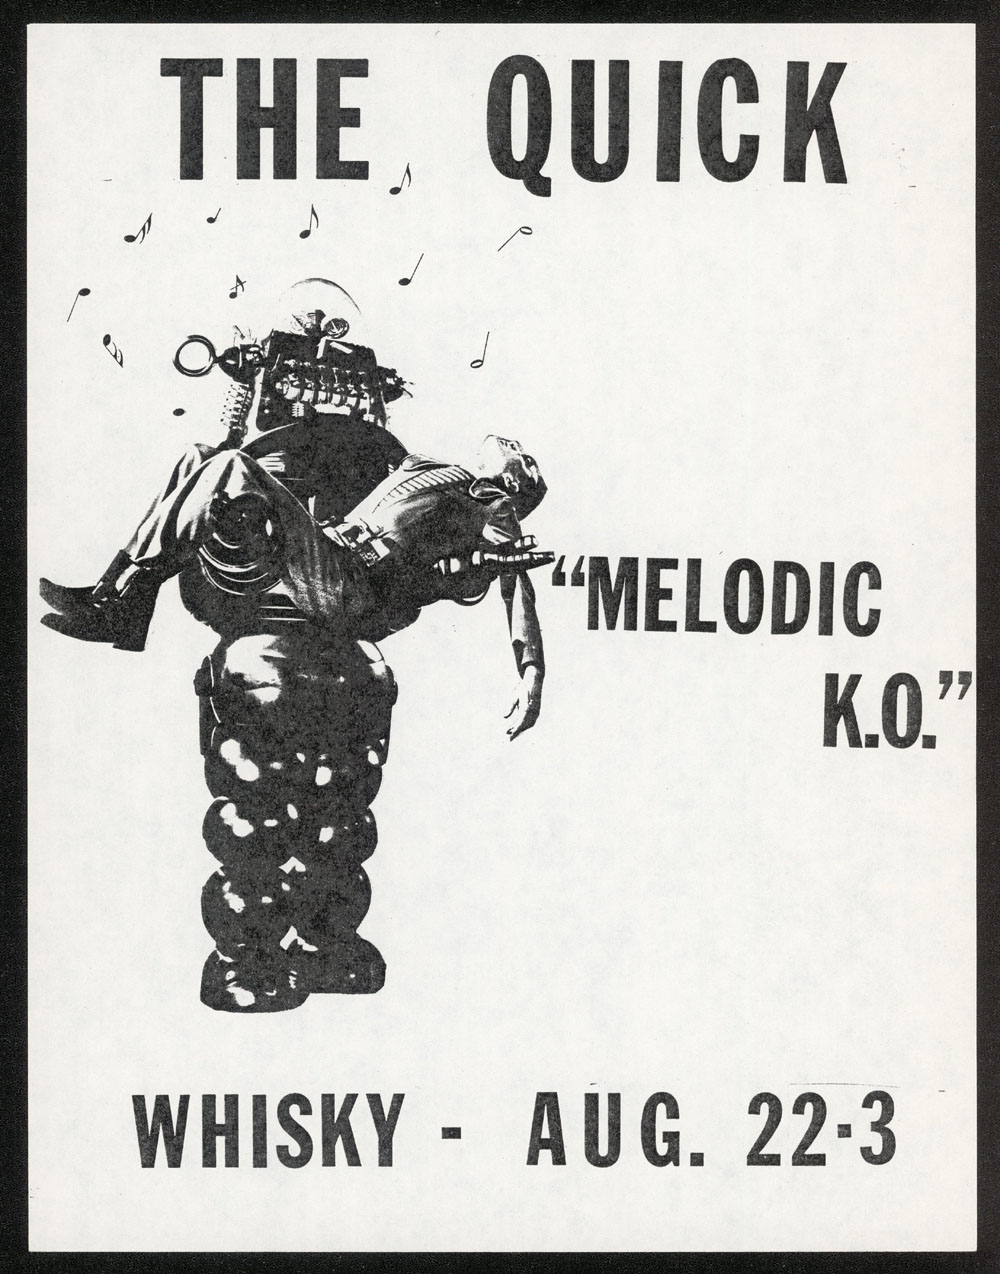 QUICK at the Whisky